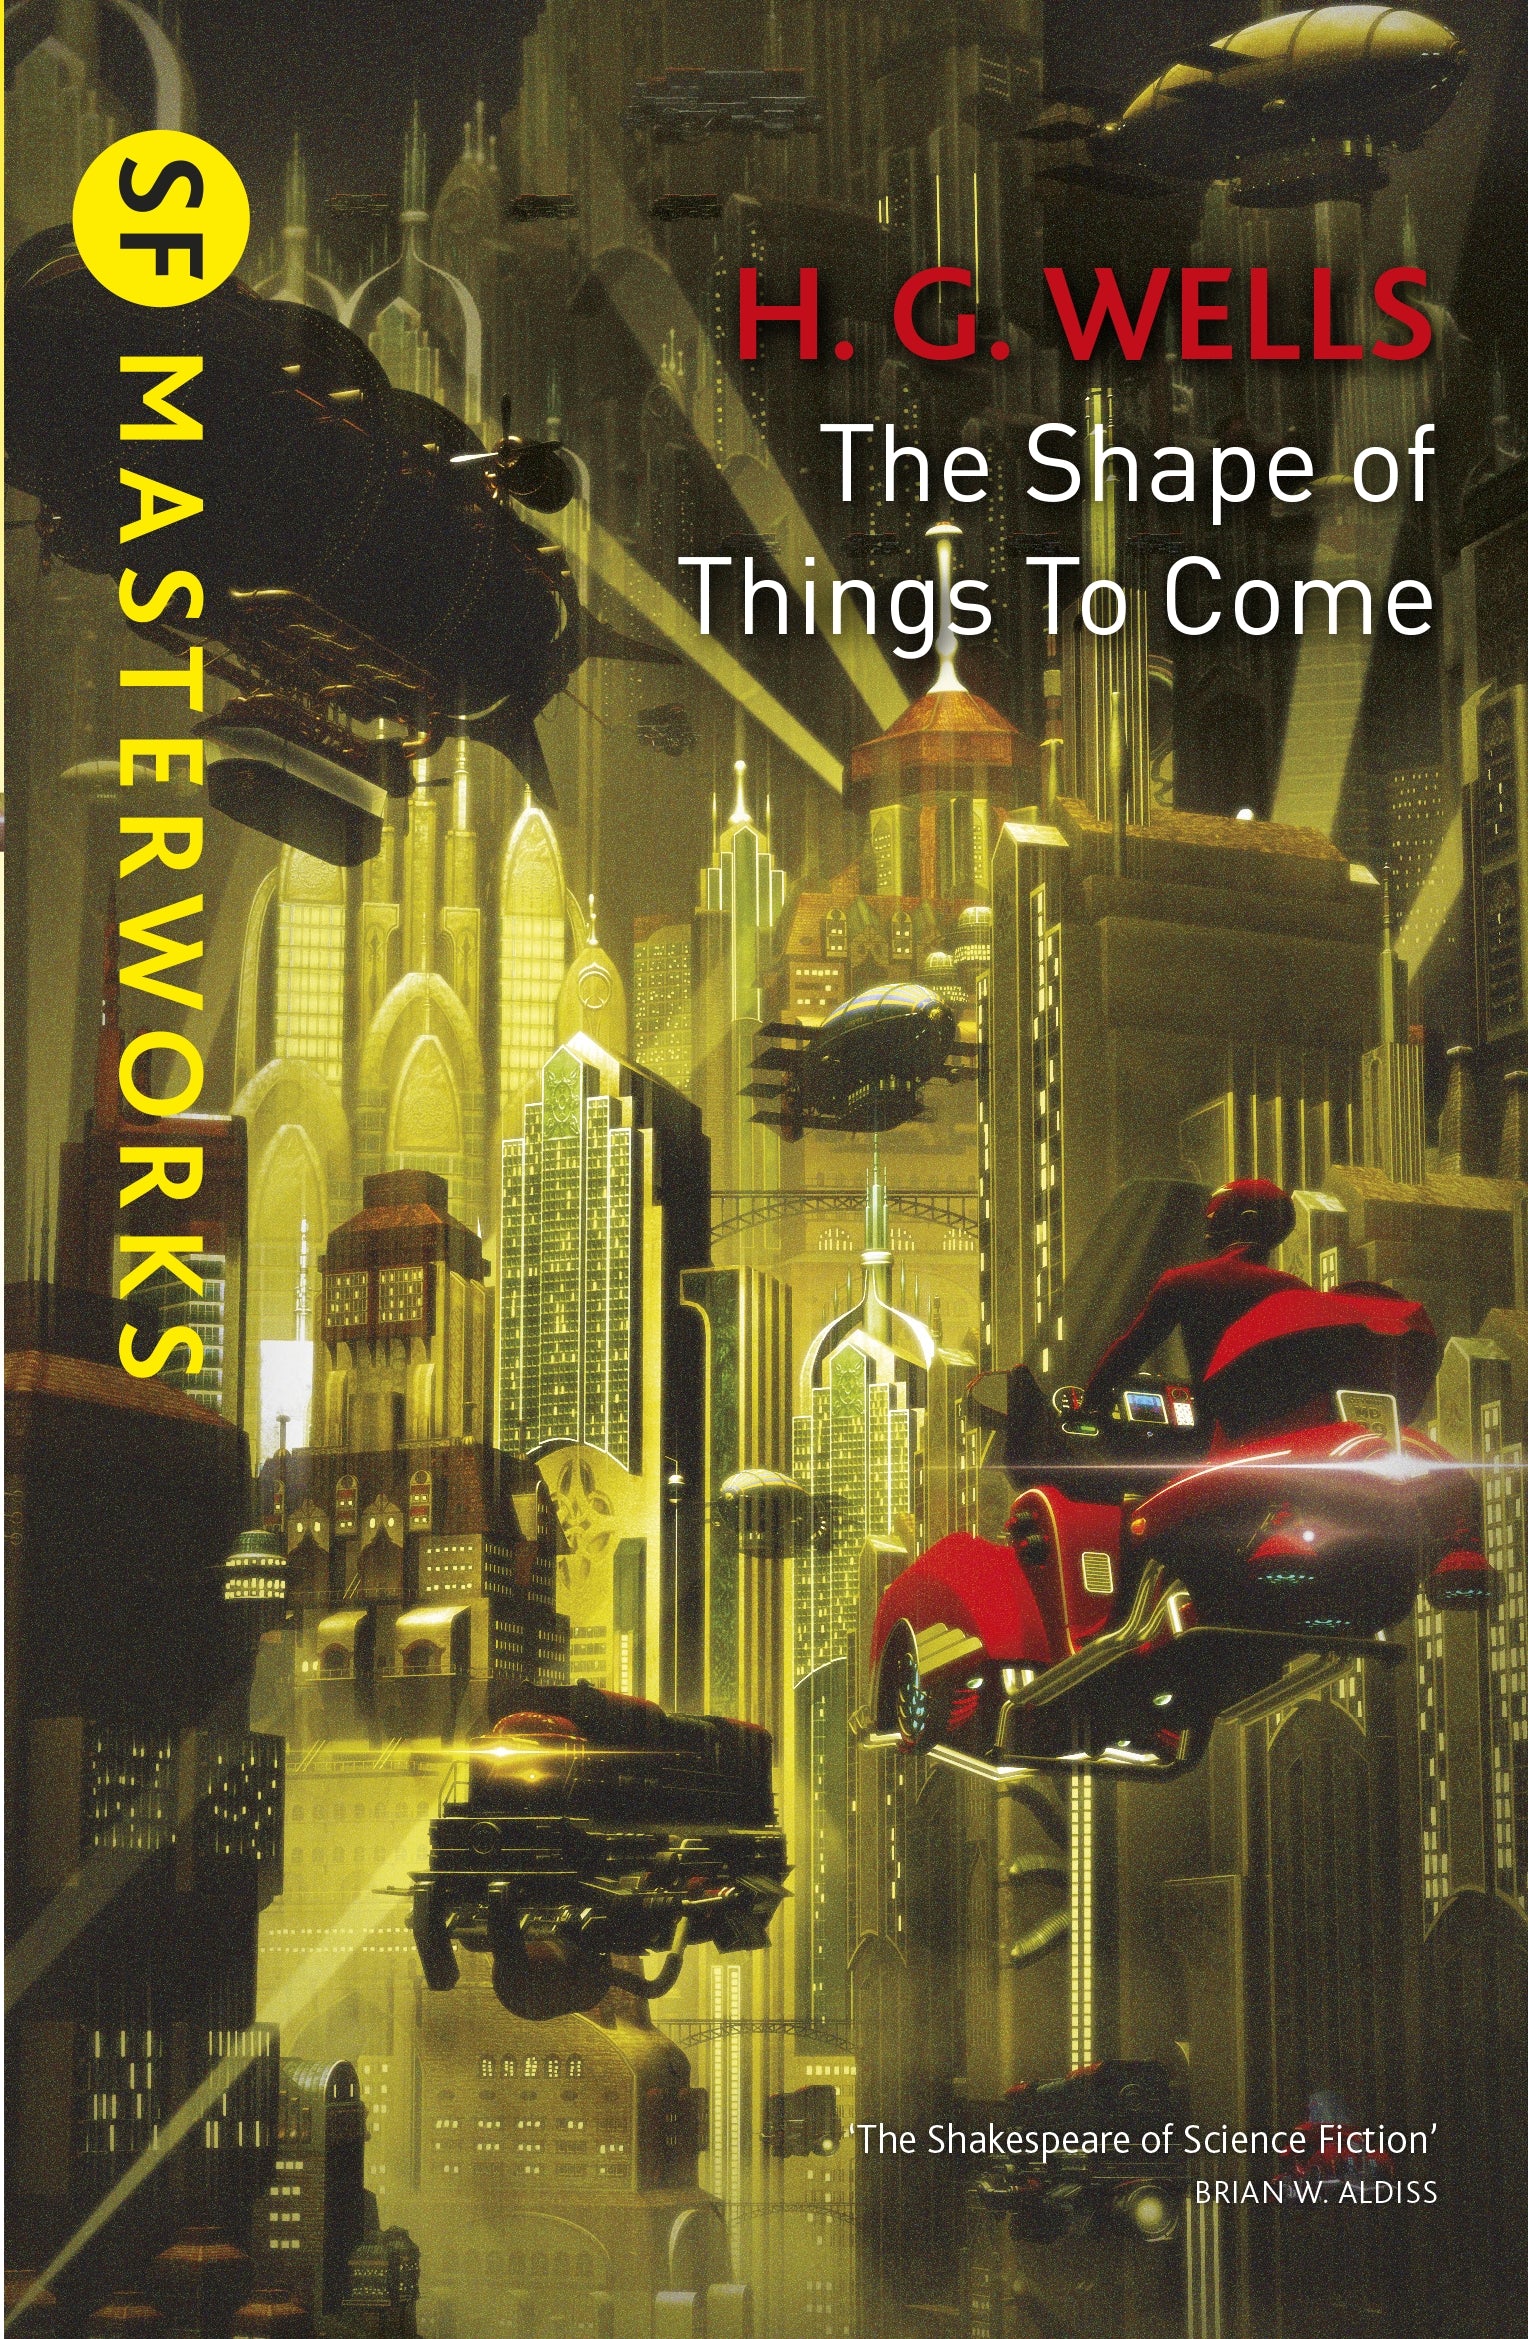 The Shape Of Things To Come by H.G. Wells